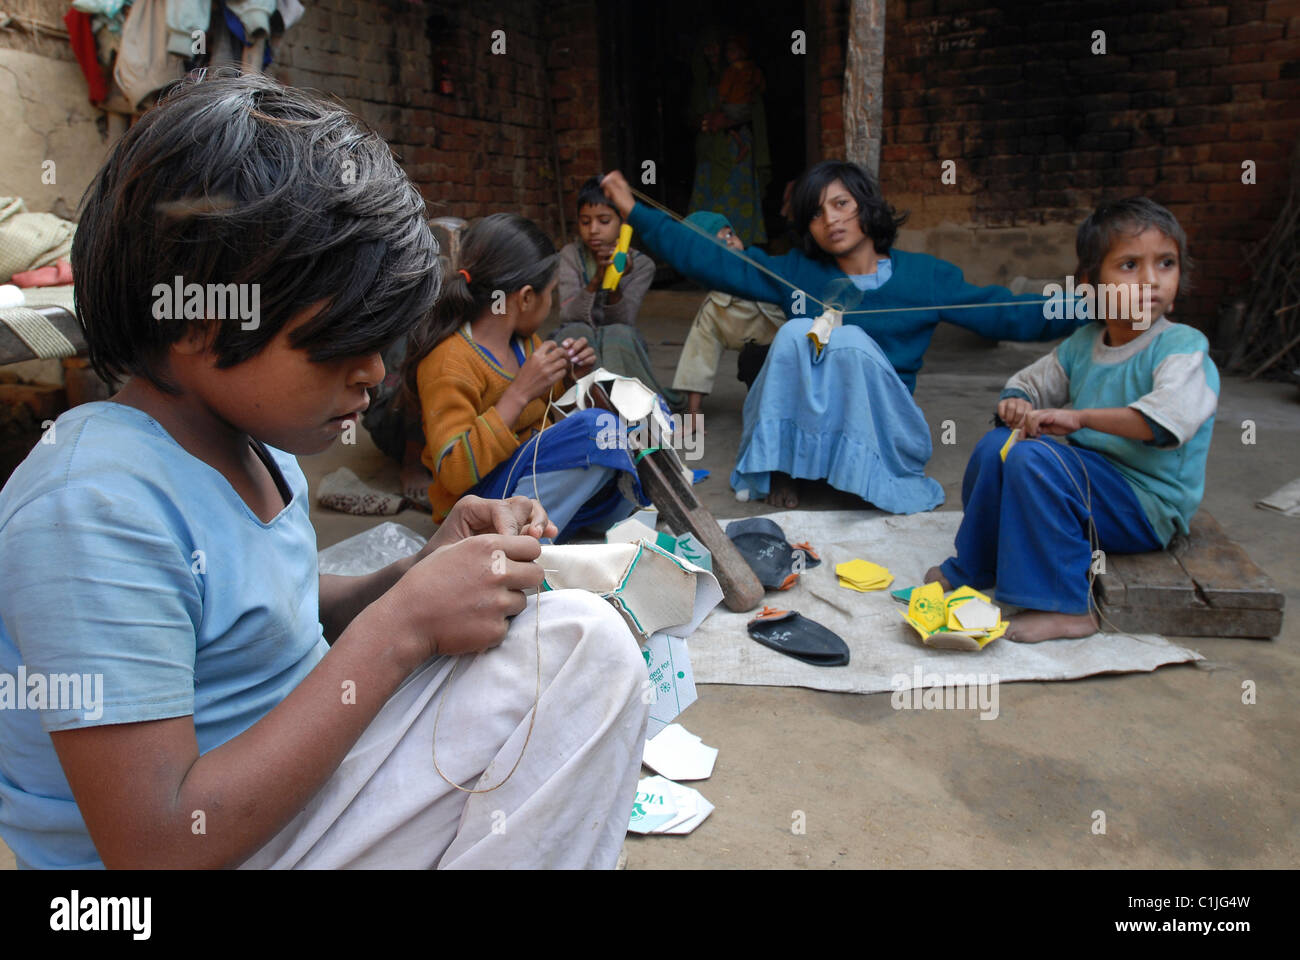 Child Labour Football High Resolution Stock Photography And Images Alamy